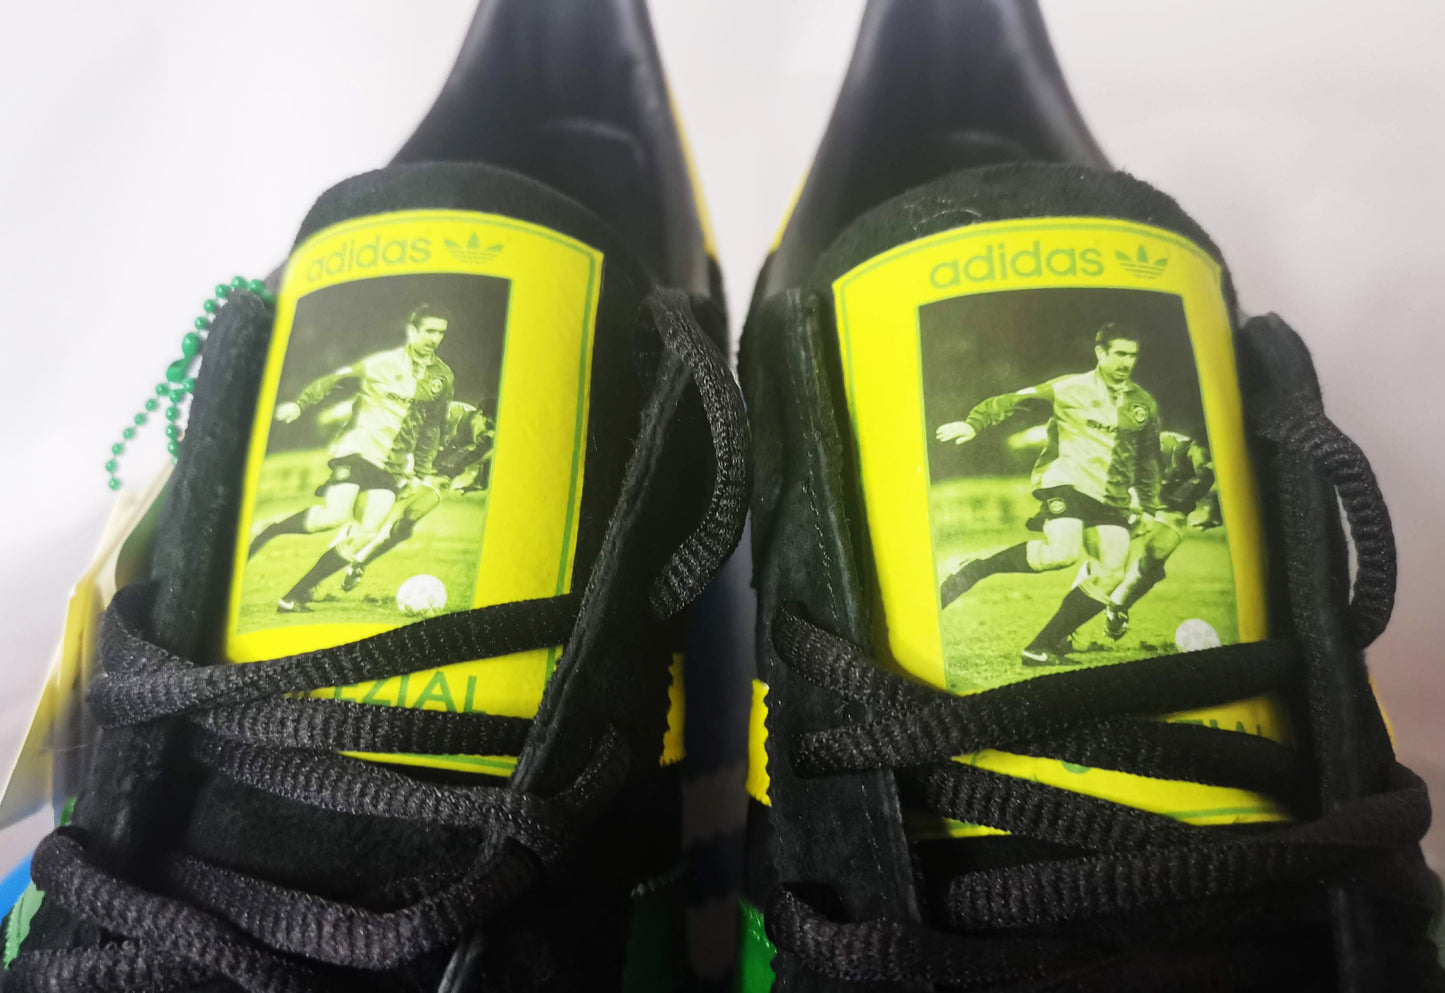 Limited edition Manchester United Eric Cantona inspired Black /Green/ Yellow Adidas custom Handball Spezial trainers  / sneakers